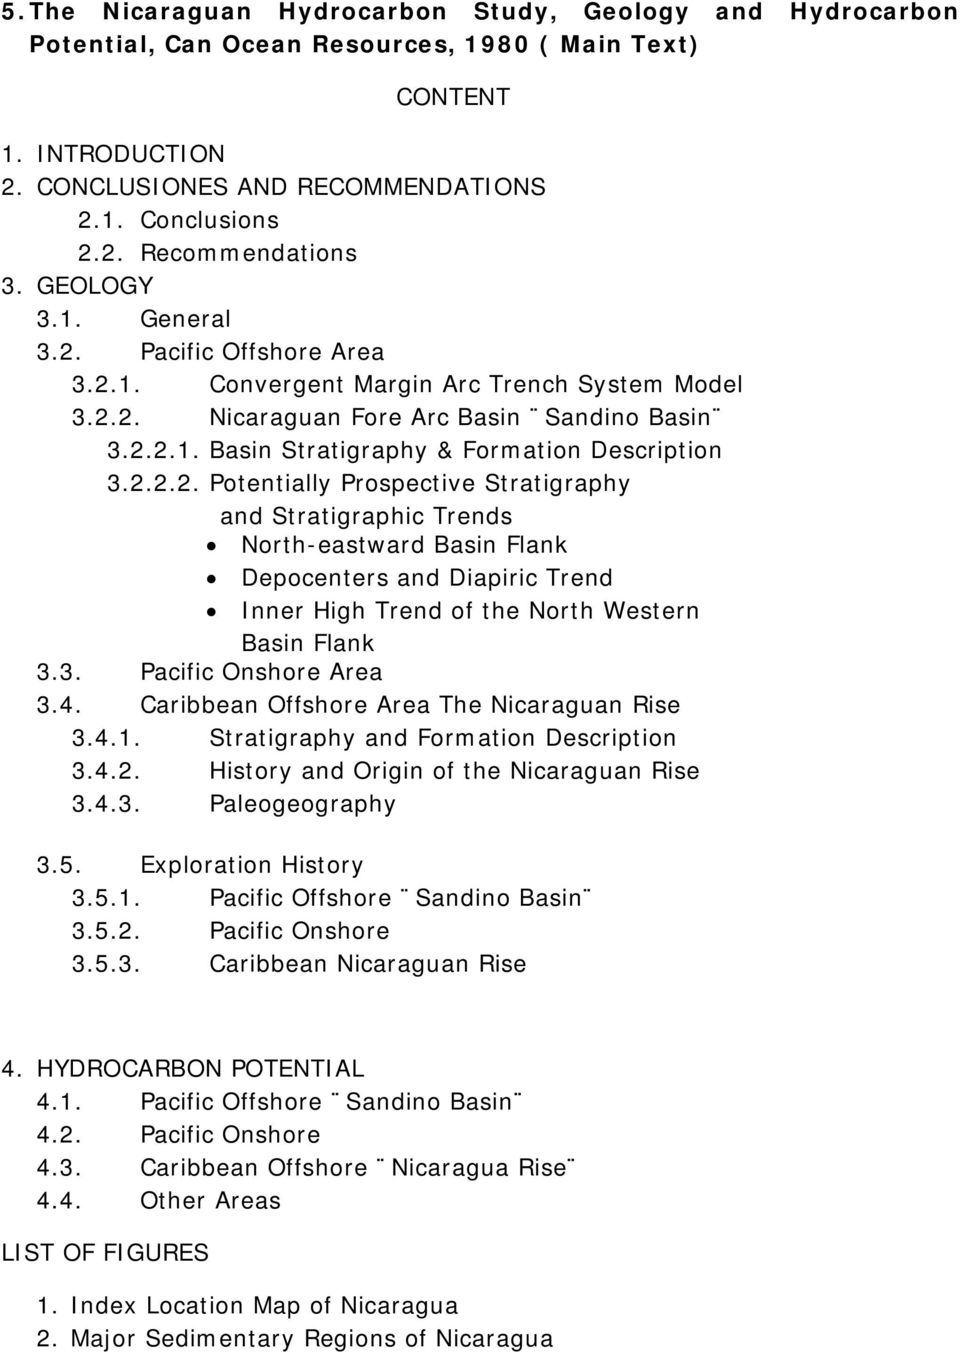 3. Pacific Onshore Area 3.4. Caribbean Offshore Area The Nicaraguan Rise 3.4.1. Stratigraphy and Formation Description 3.4.2. History and Origin of the Nicaraguan Rise 3.4.3. Paleogeography 3.5.